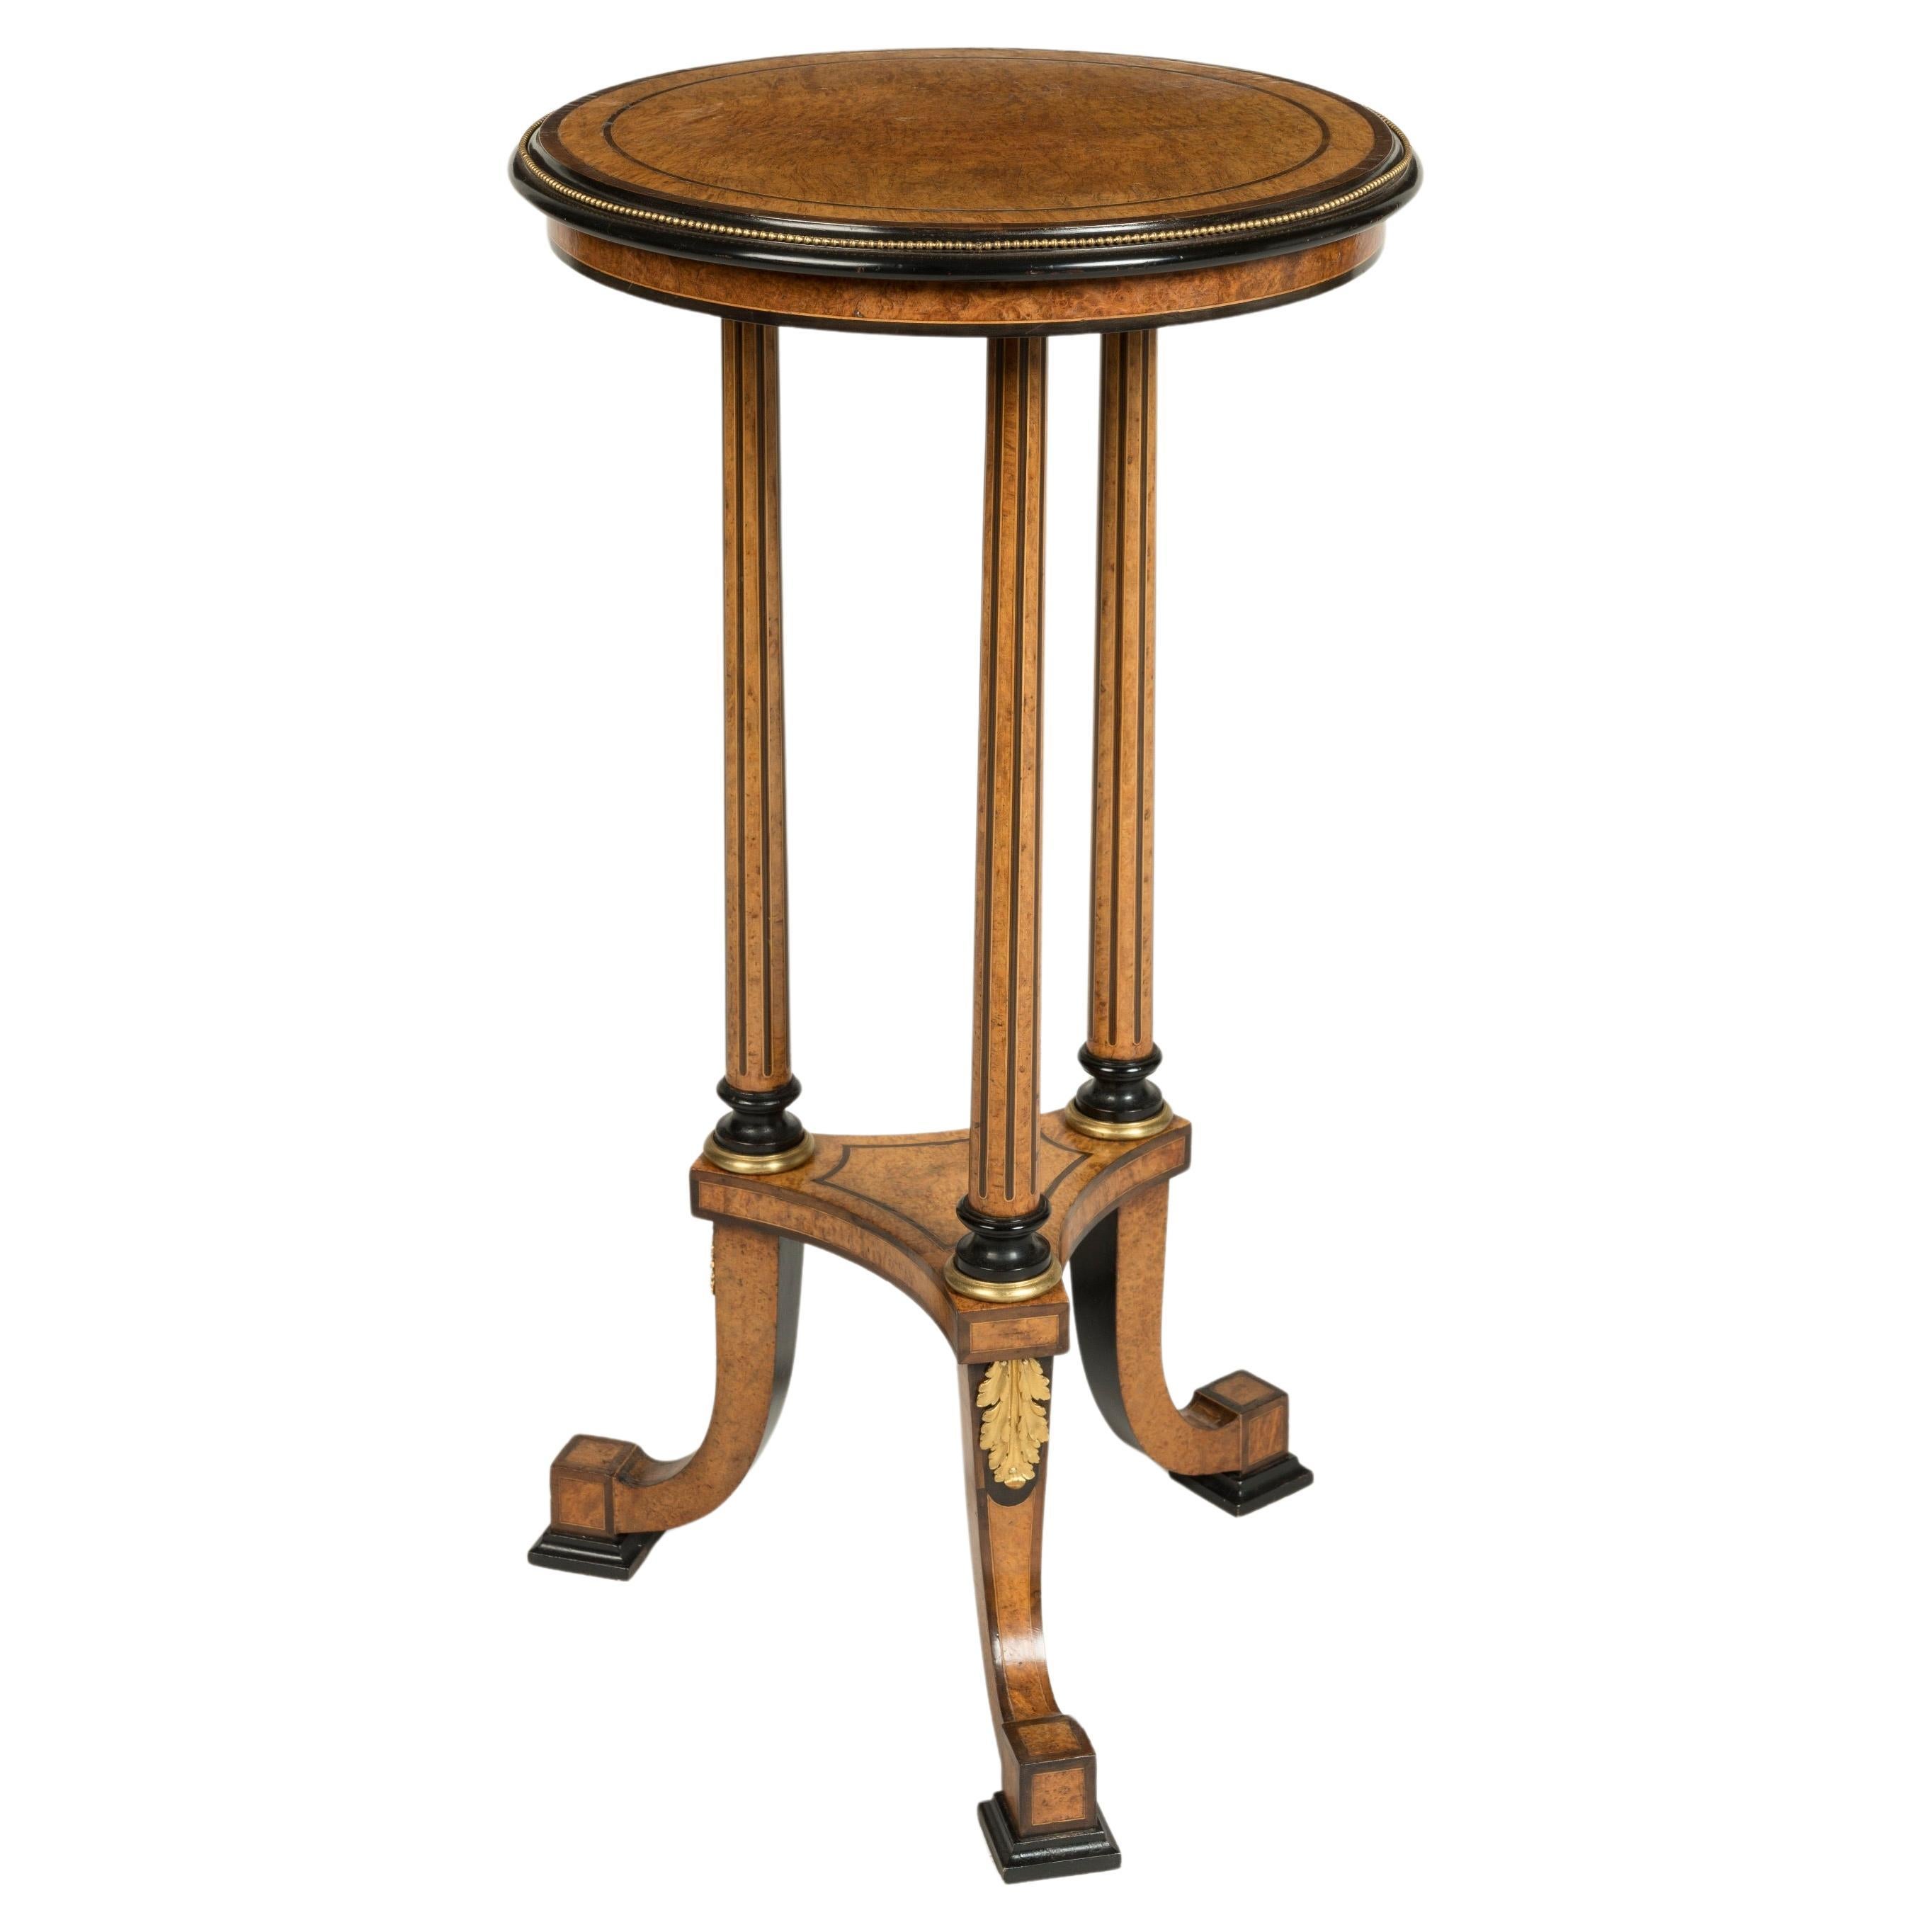 19th Century English Burr Walnut Tripod Table by Gregory & Co of London